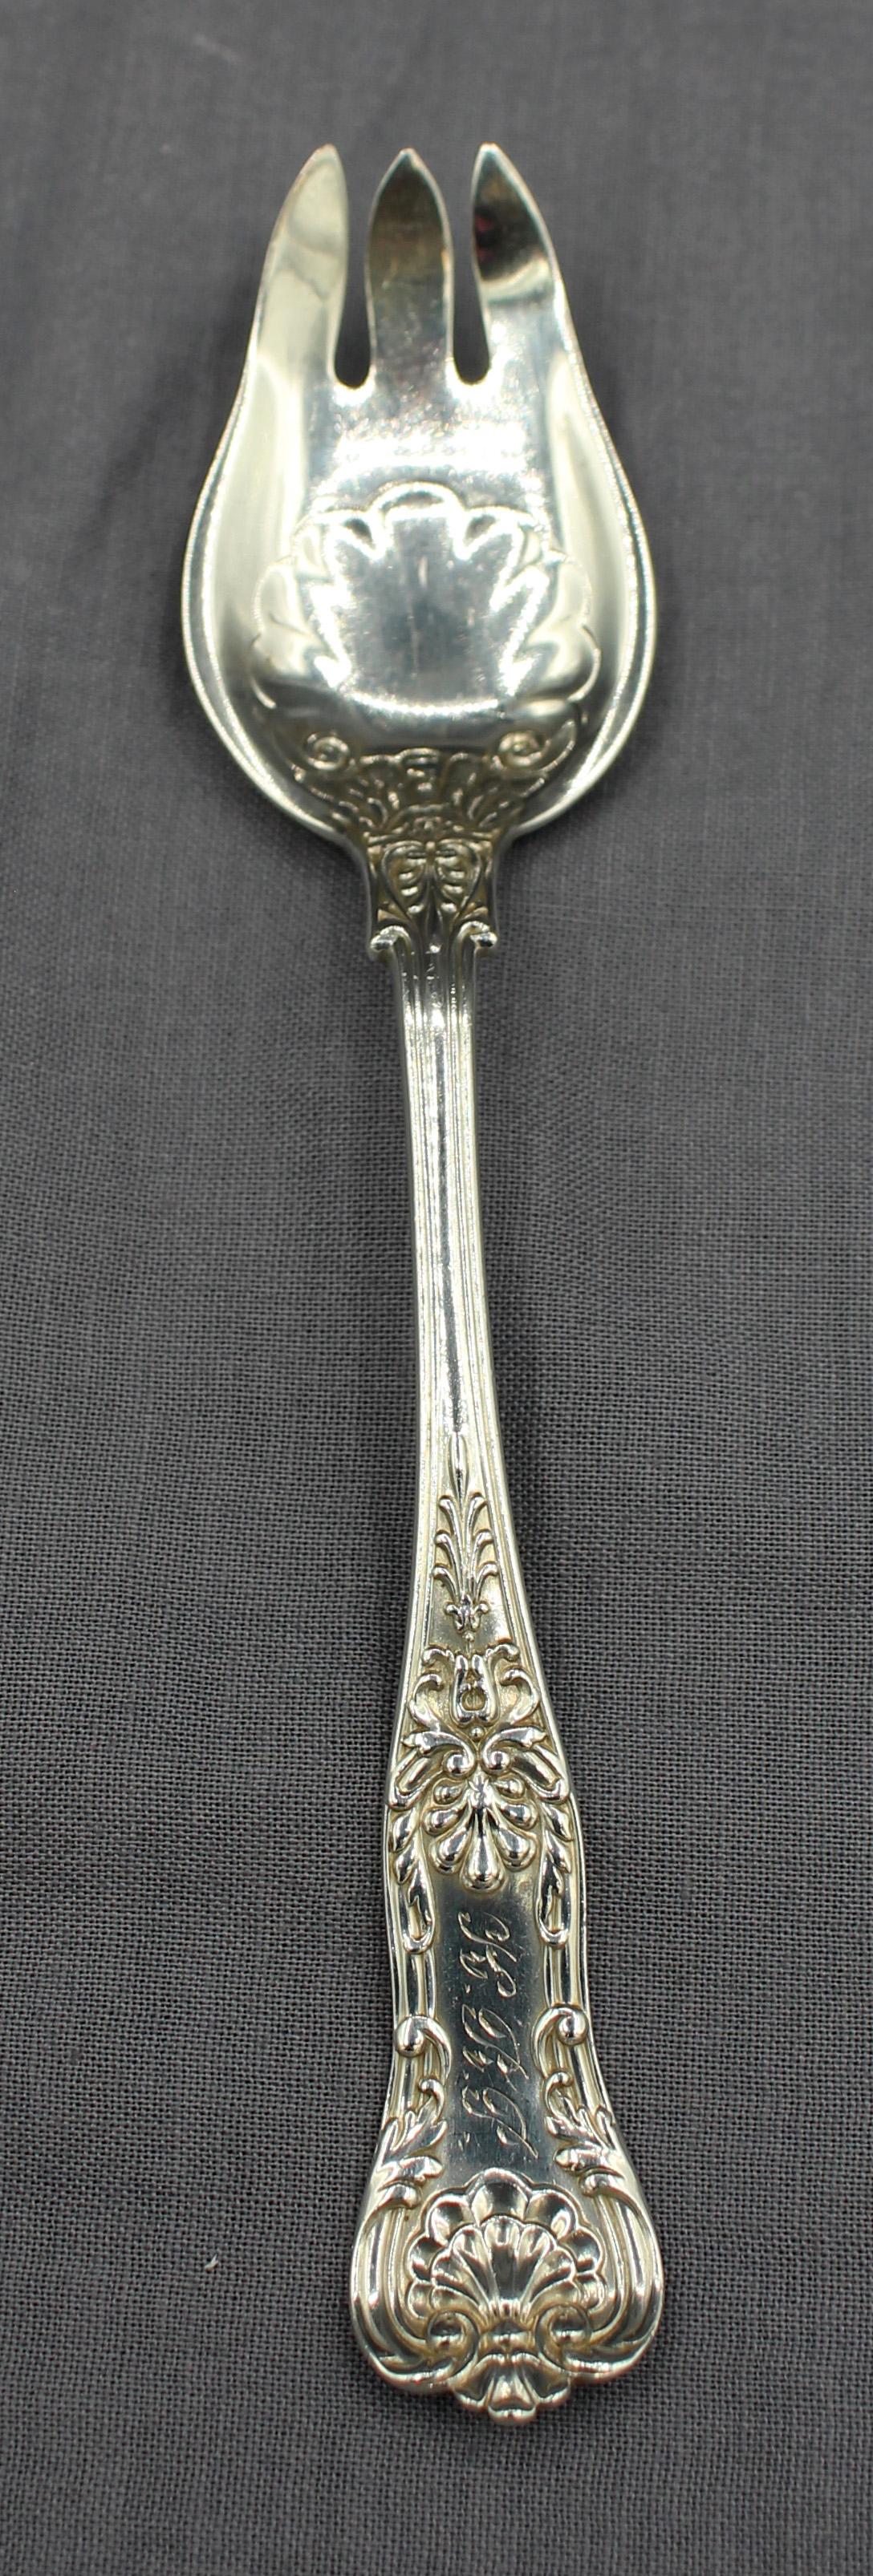 Antique sterling silver set of 10 ice cream or terrapin forks, King George pattern by Gorham. Very rare set. Shell bowl with full traditional Georgian shell motifs. Full obverse design. Monogram 